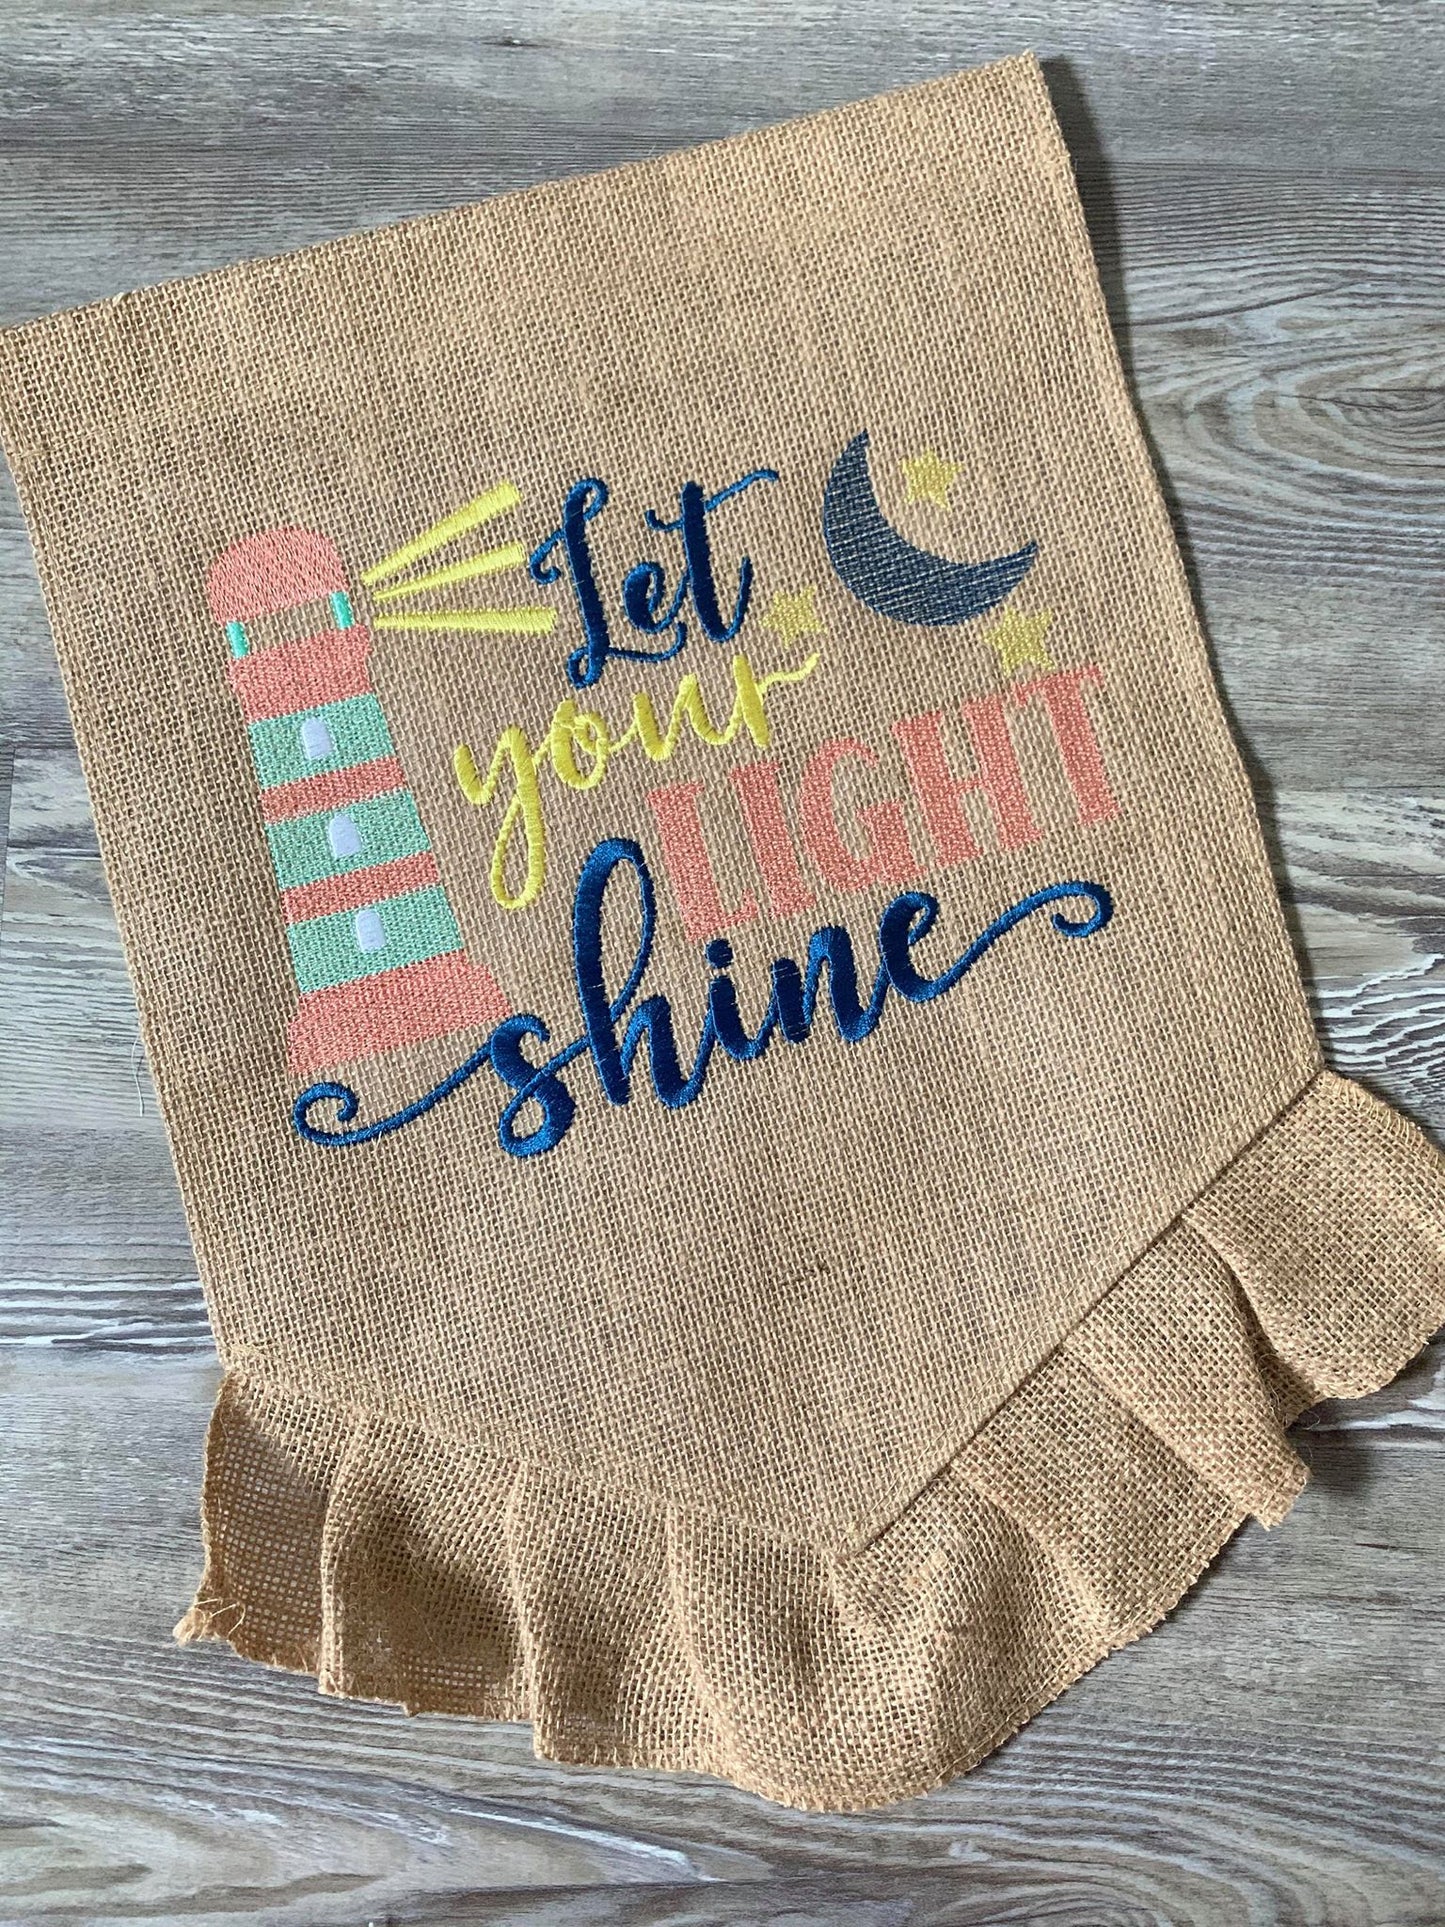 Let Your Light Shine - 3 Sizes - Digital Embroidery Design